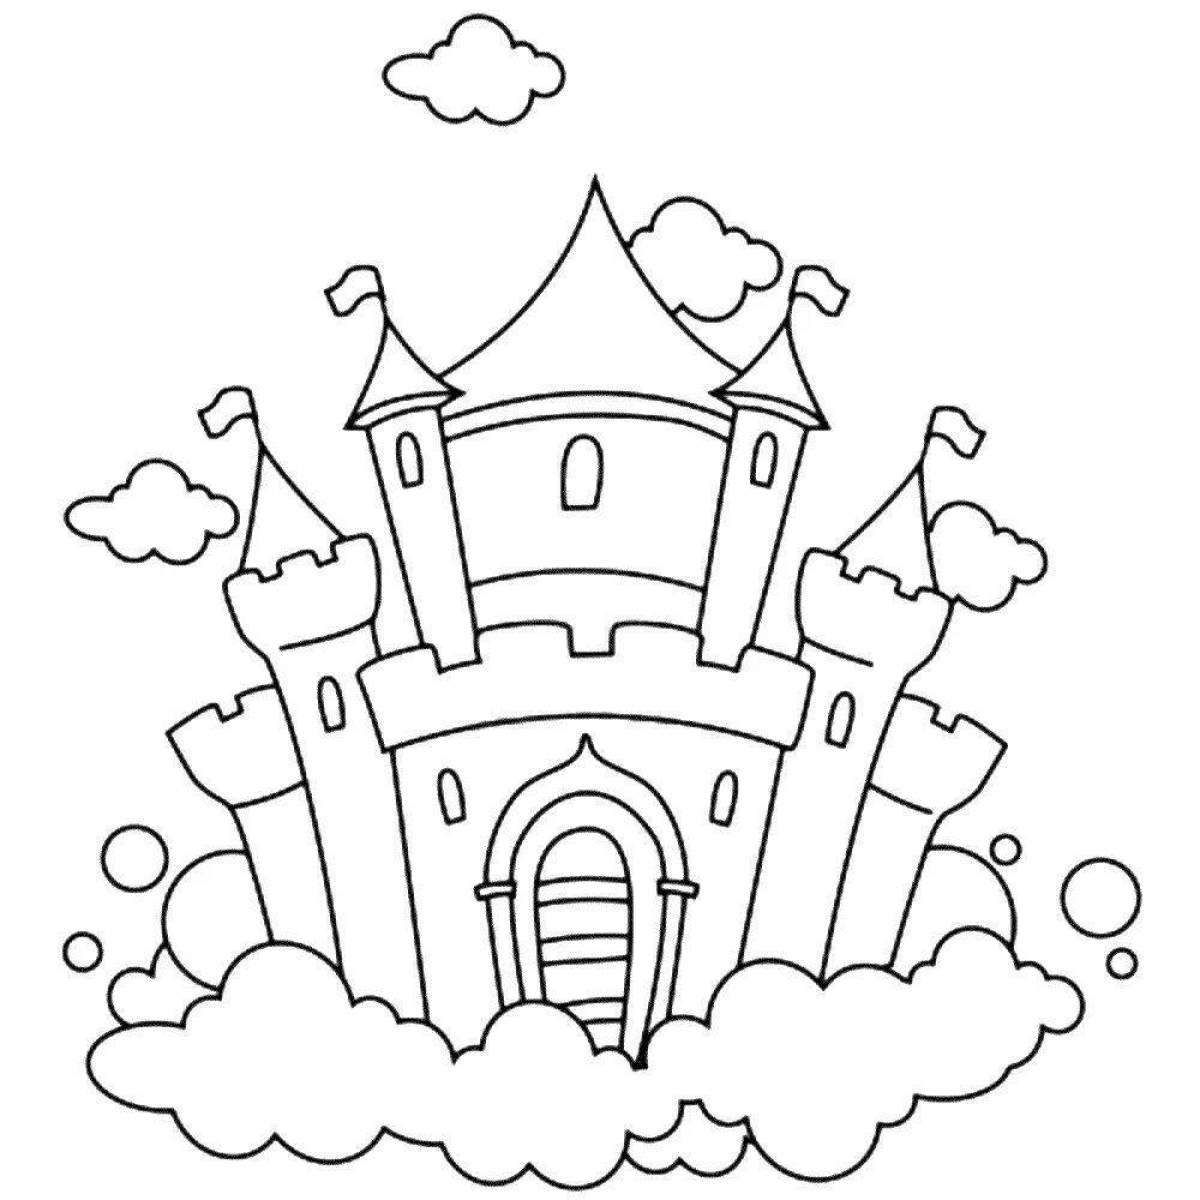 Wonderful palace coloring pages for kids